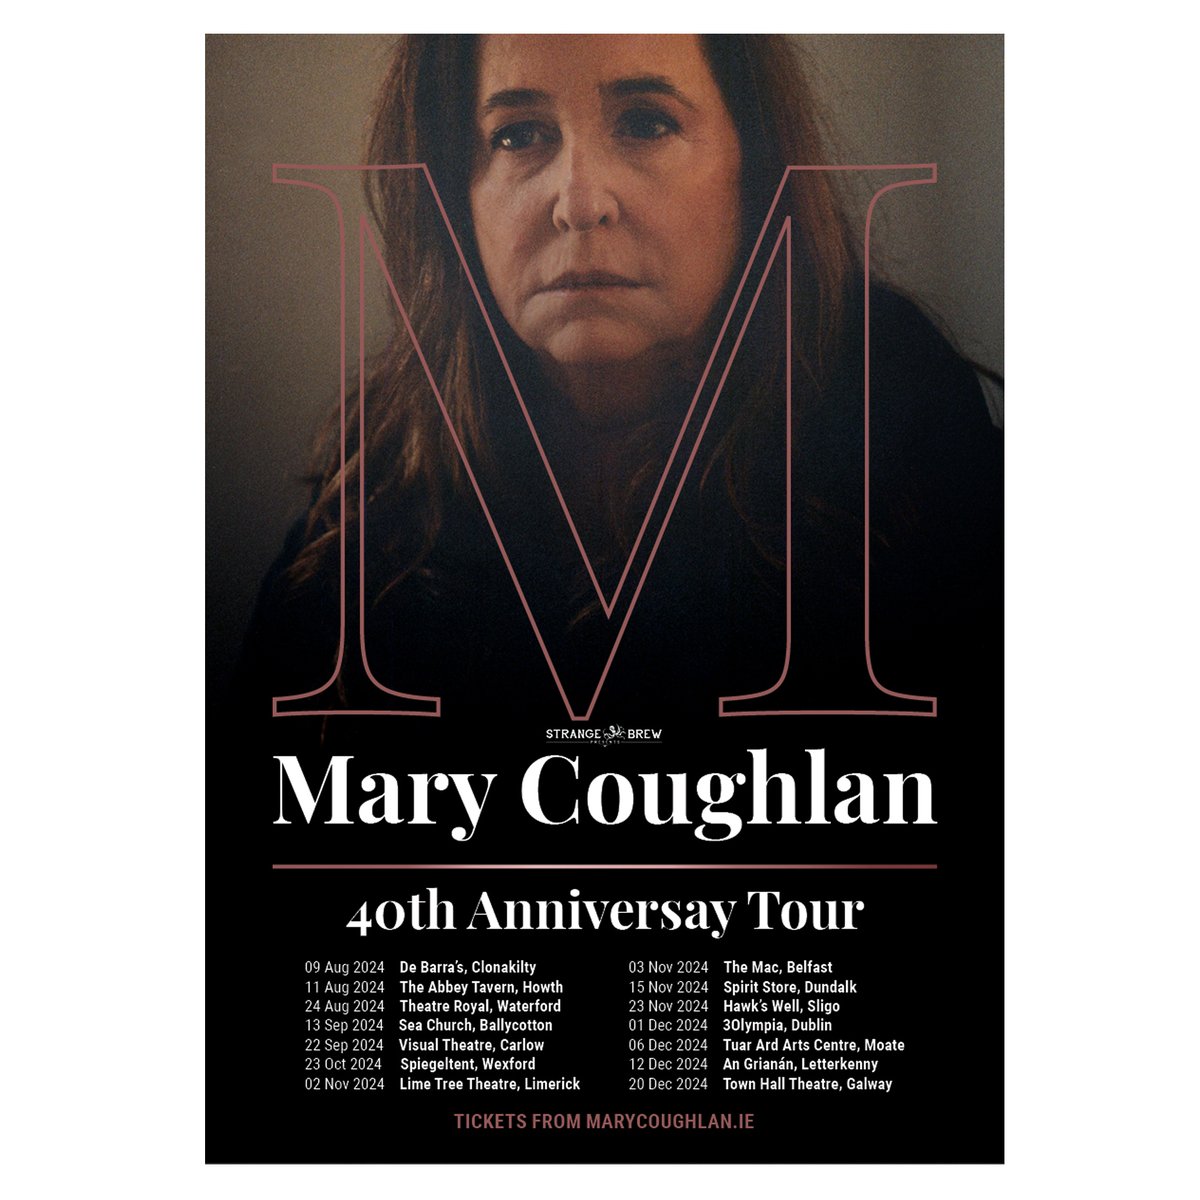 Mary Coughlan has shared her new single ‘More Like Brigid’. Listen: strange-brew.lnk.to/txjFDEgP A prolific artist by anyone’s standards, Coughlan is celebrating 40 years in music this year with a nationwide tour - see poster. @mary_coughlan4 @StrangeBrewIrl